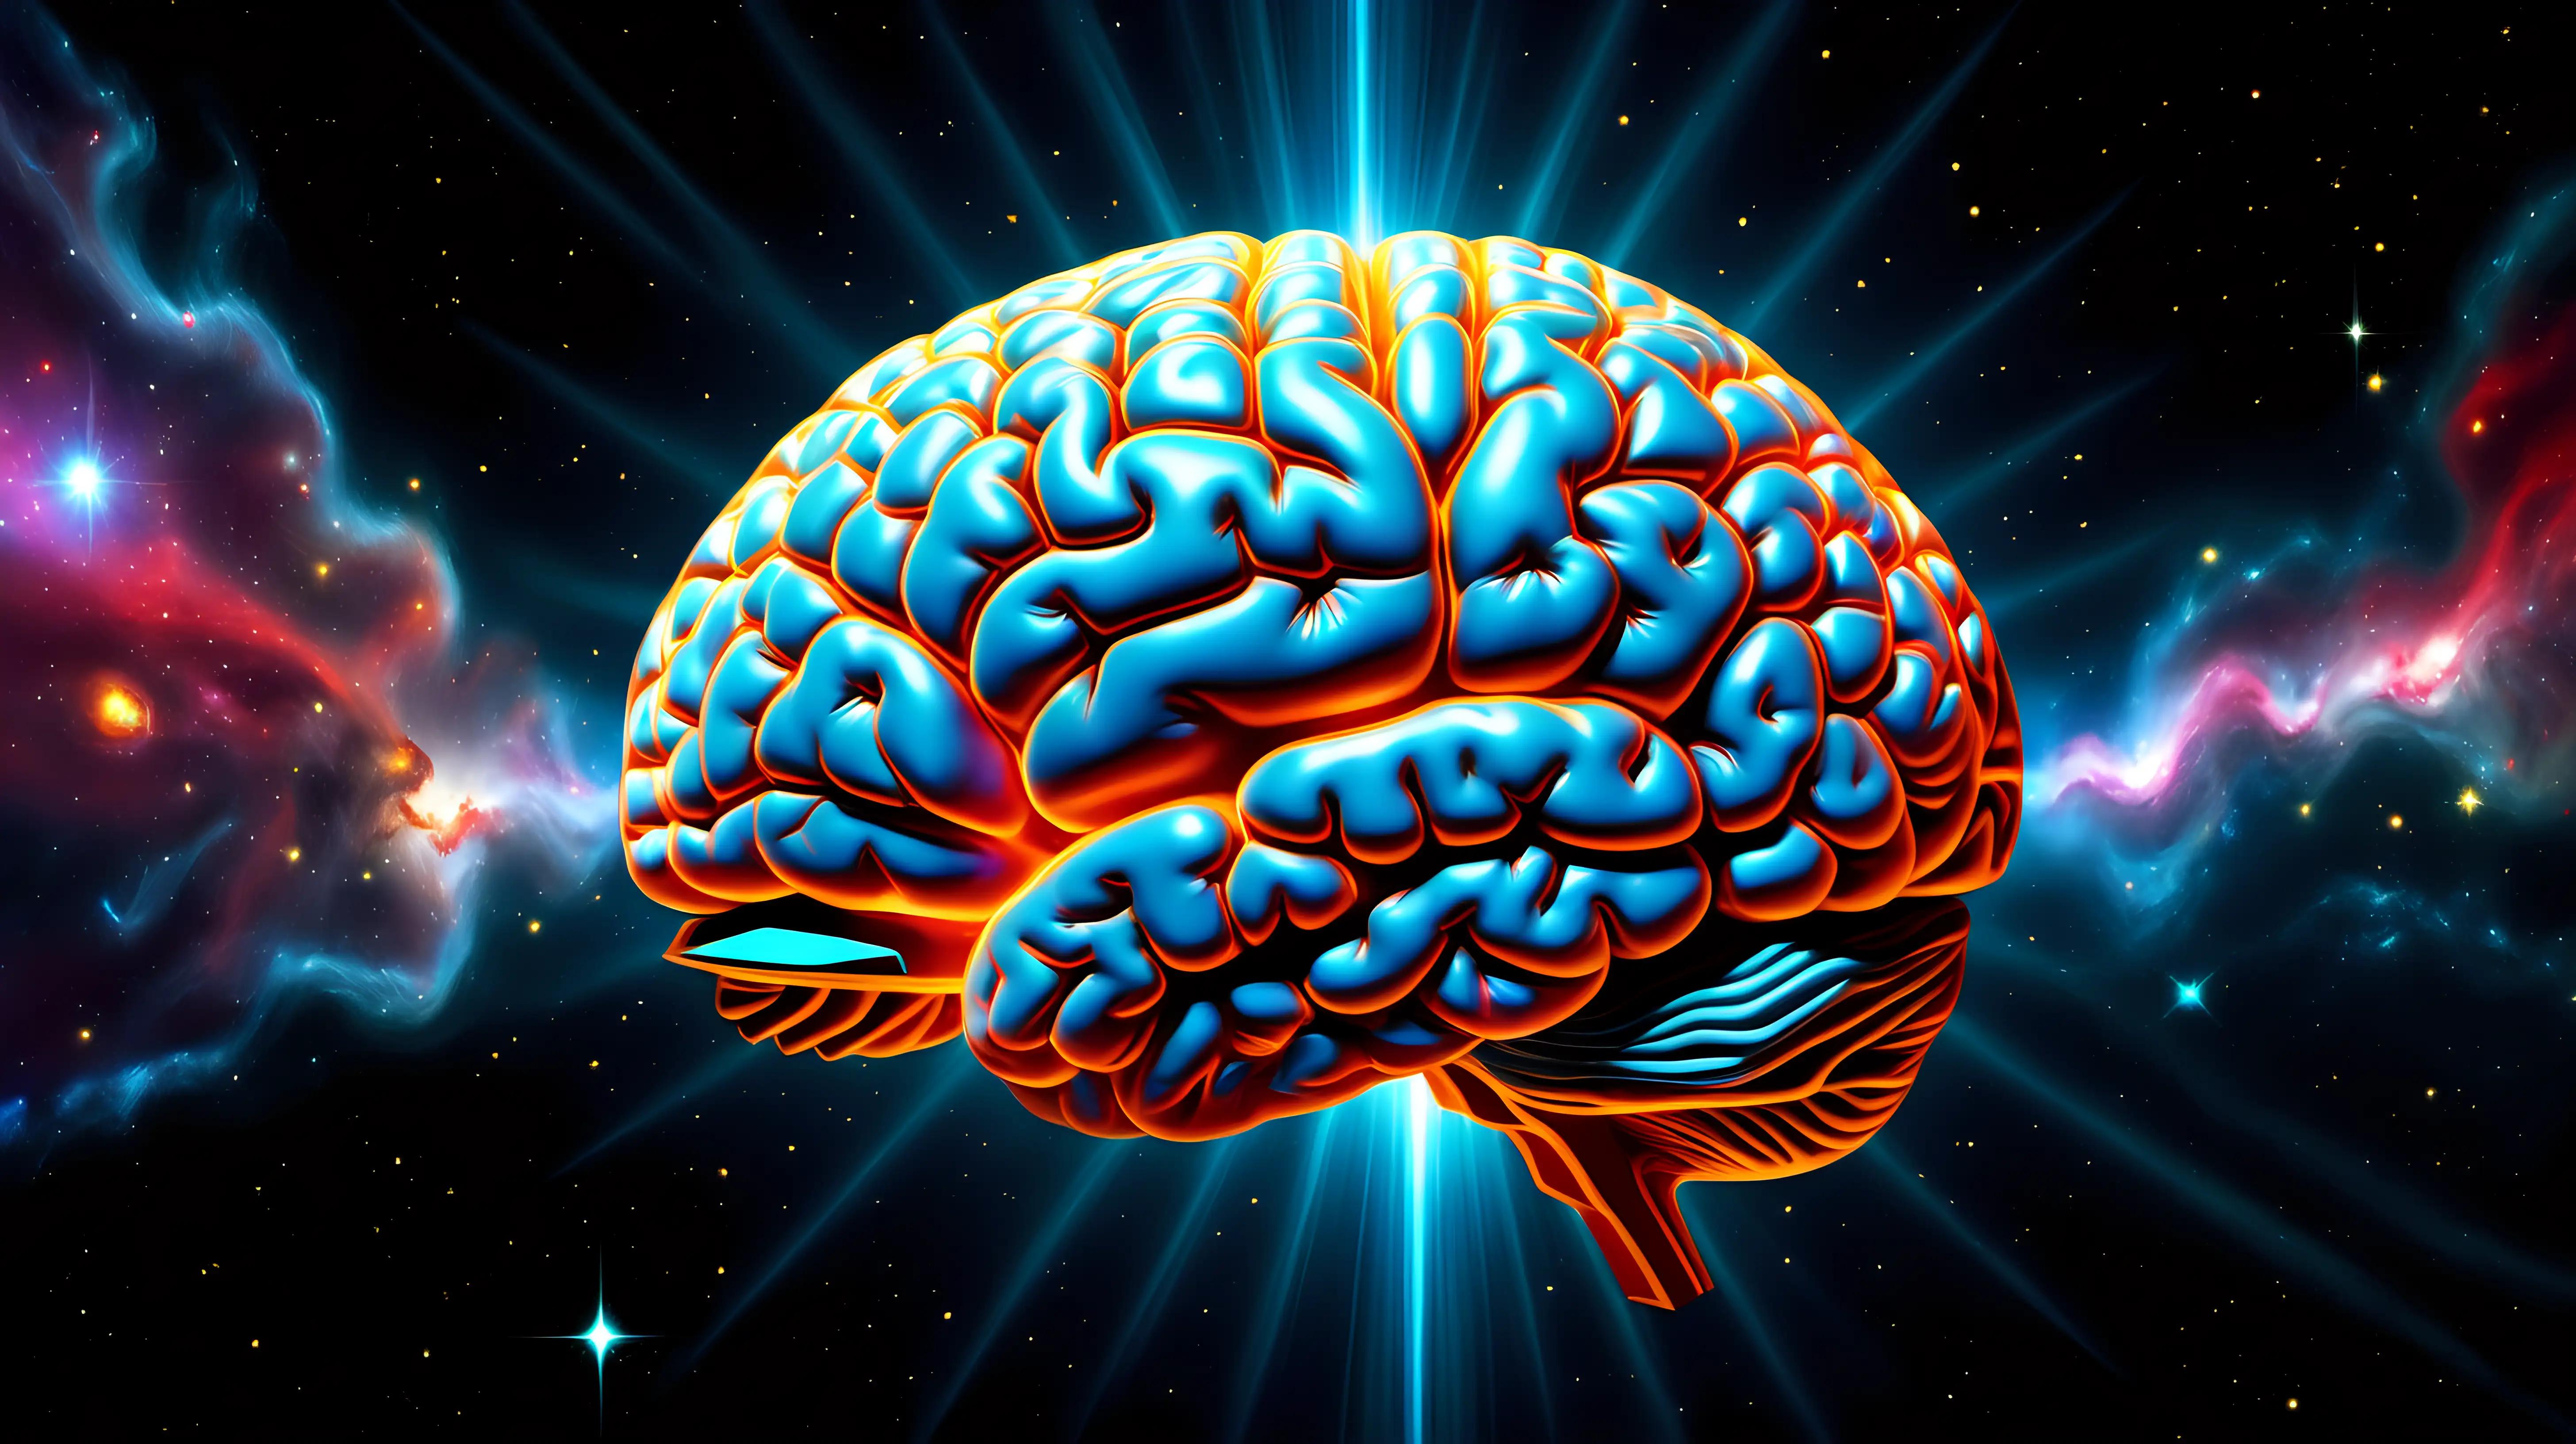 A celestial rendering of a brain in space, with radiant lights casting a glow on its convoluted surface, symbolizing the brilliance of human thought.